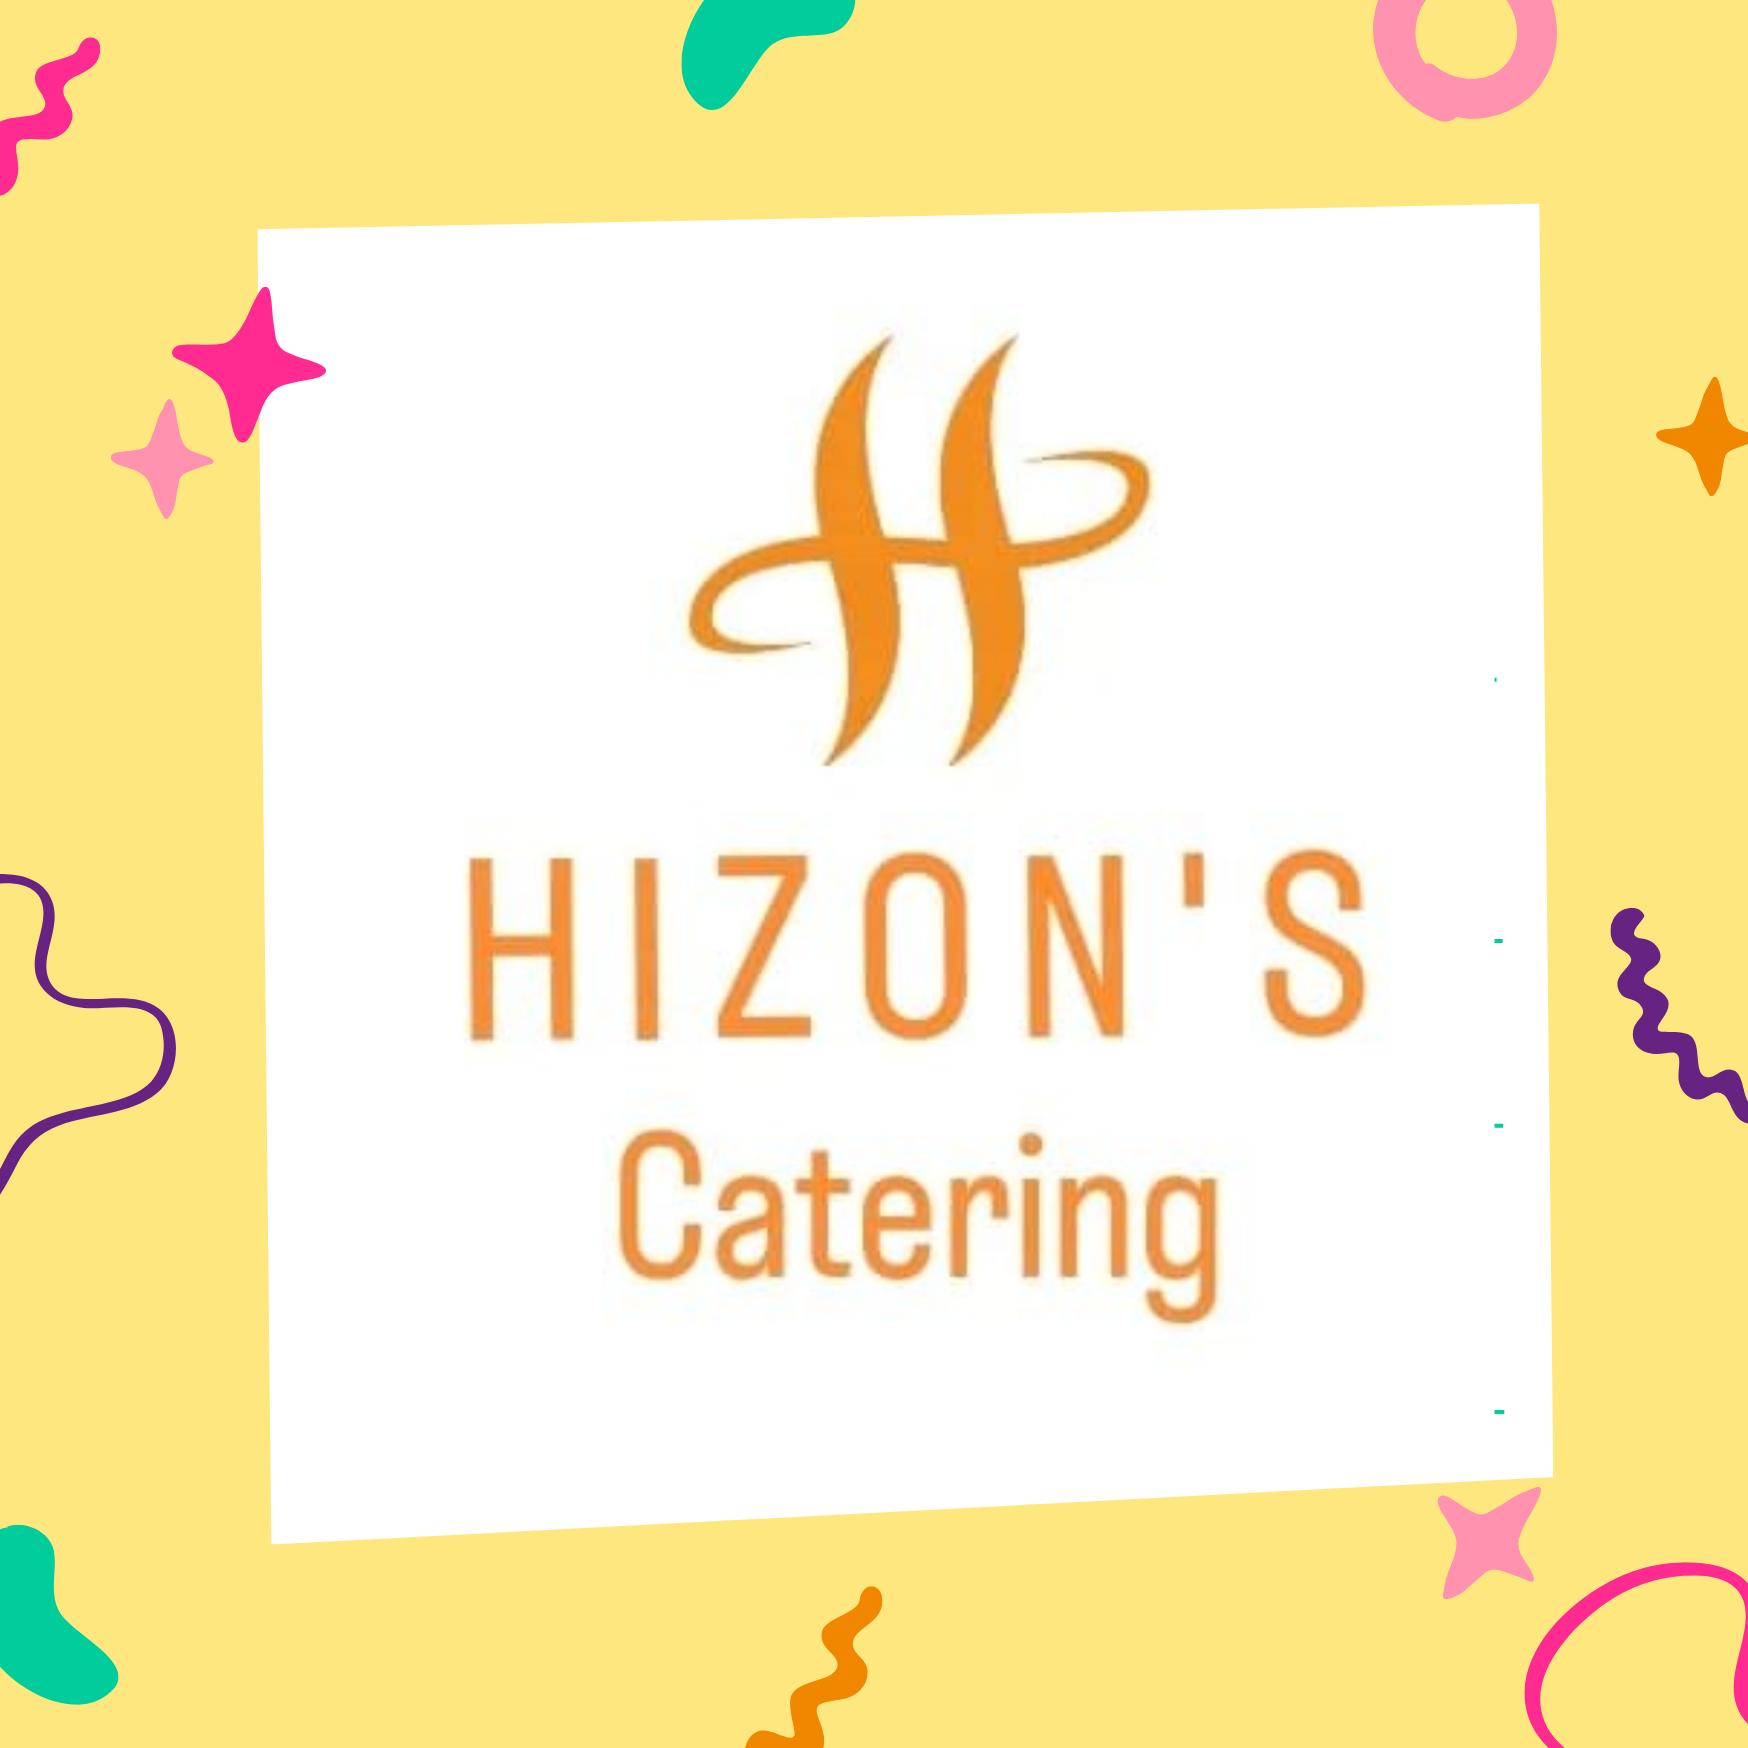 Hizon's Restaurant and Catering Services Inc